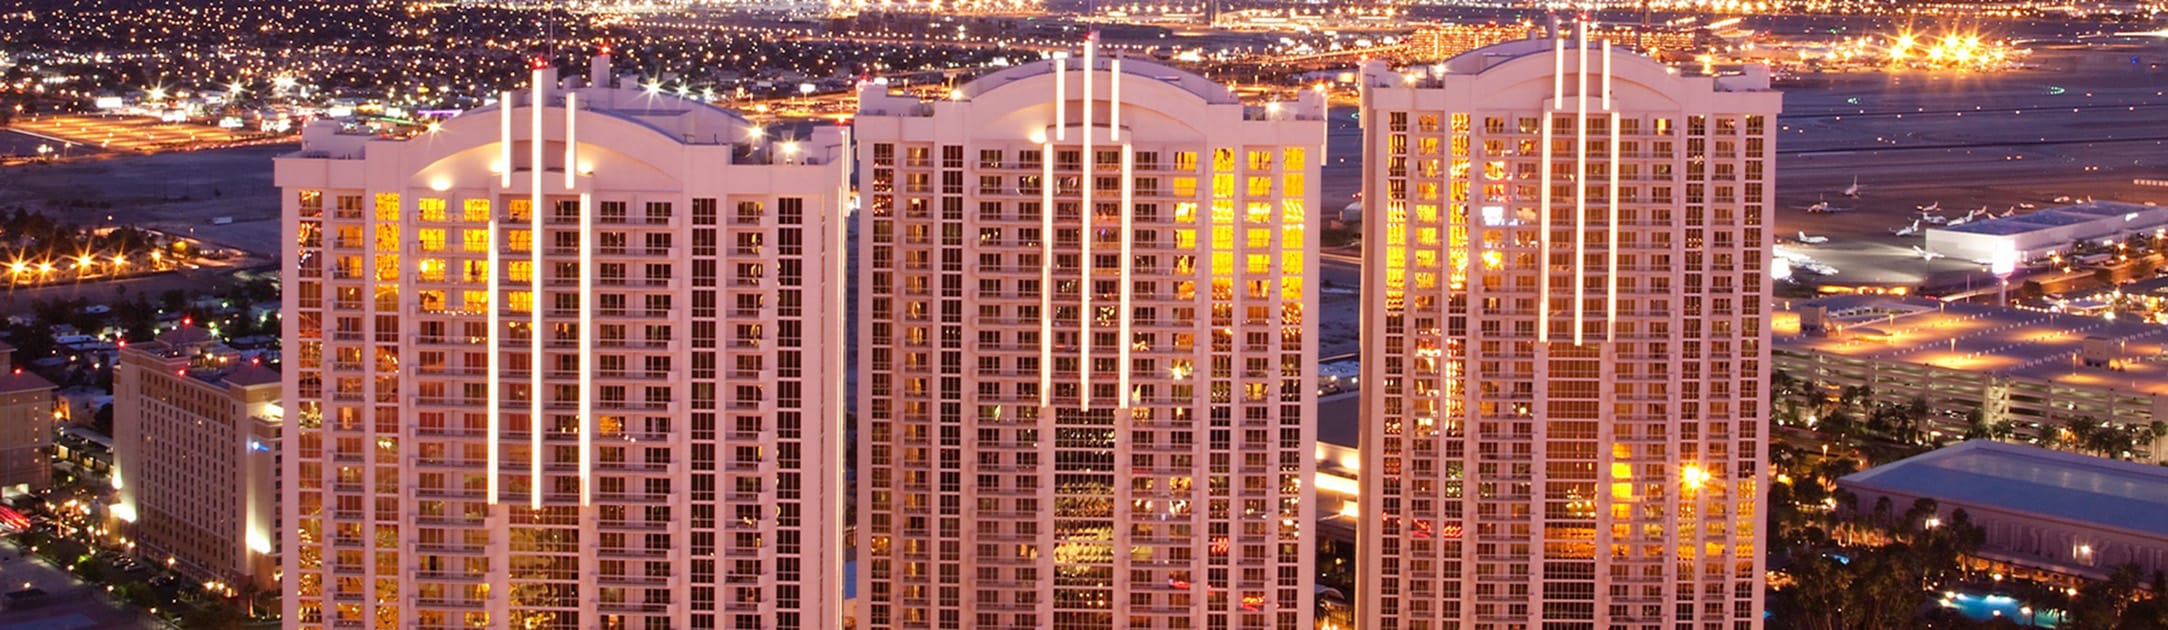 Night view of the top of 3 high rises with pink and yellow hues. High rises and businesses in the background.